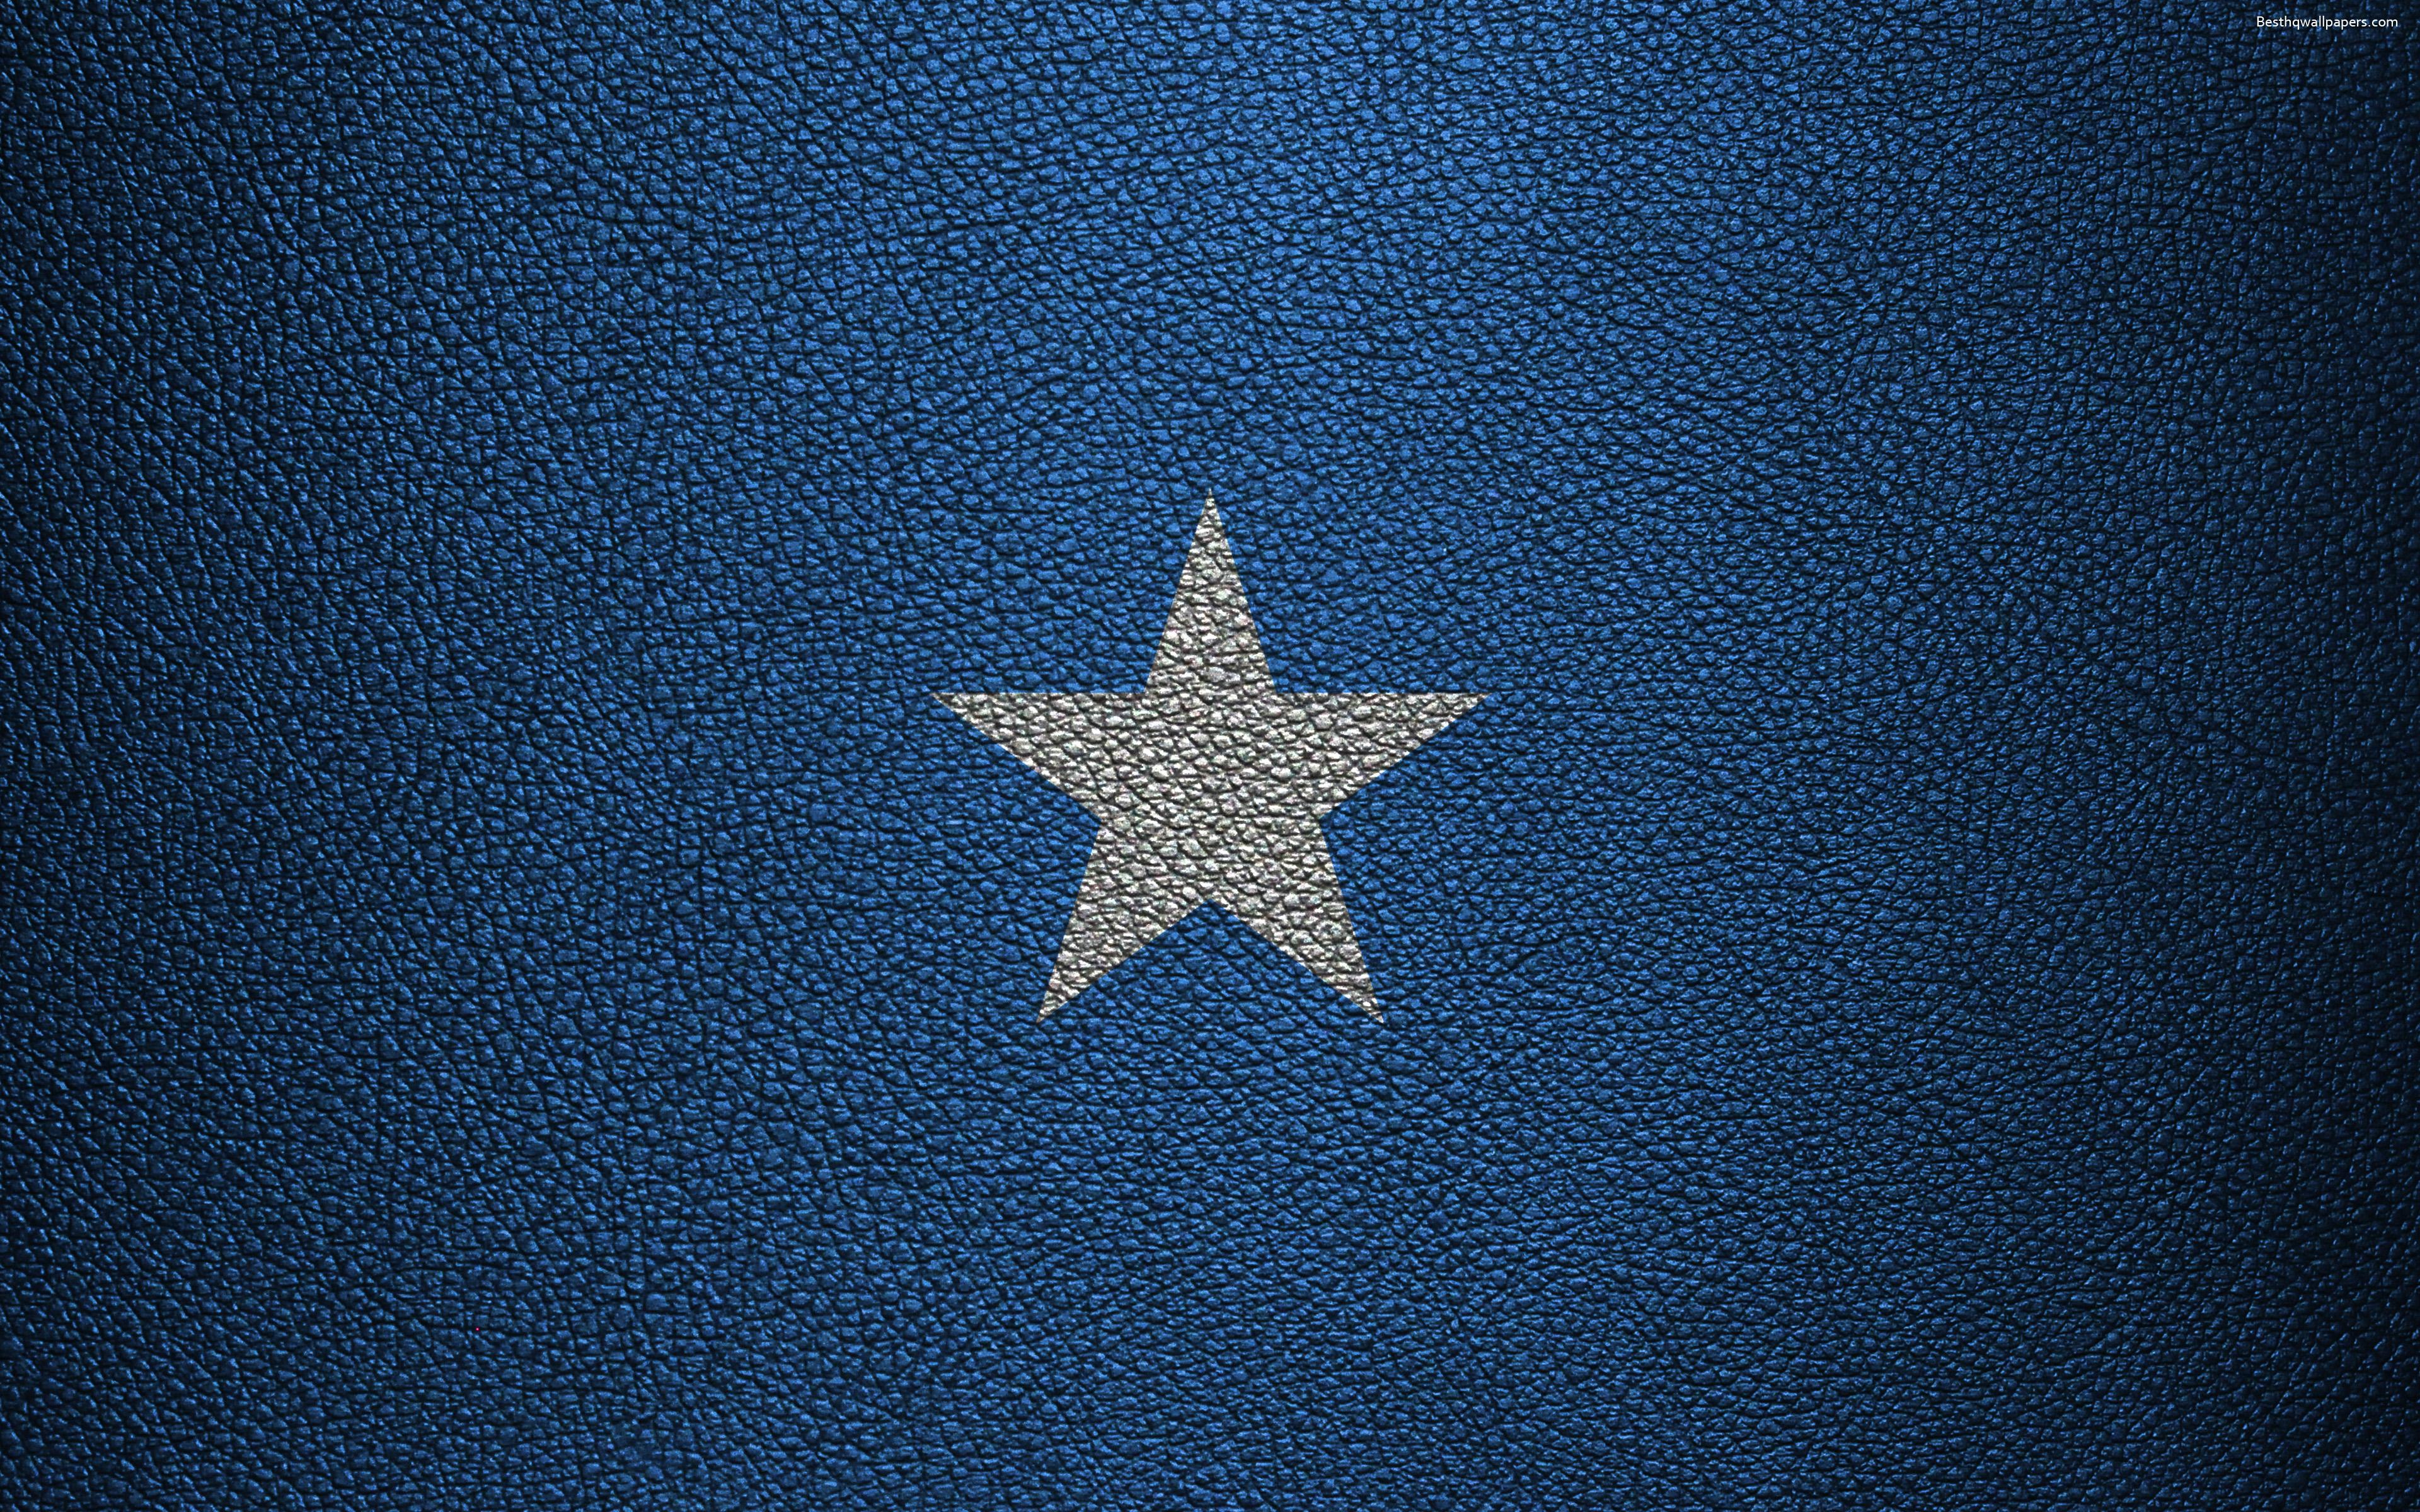 Download wallpaper Flag of Somalia, Africa, 4k, leather texture